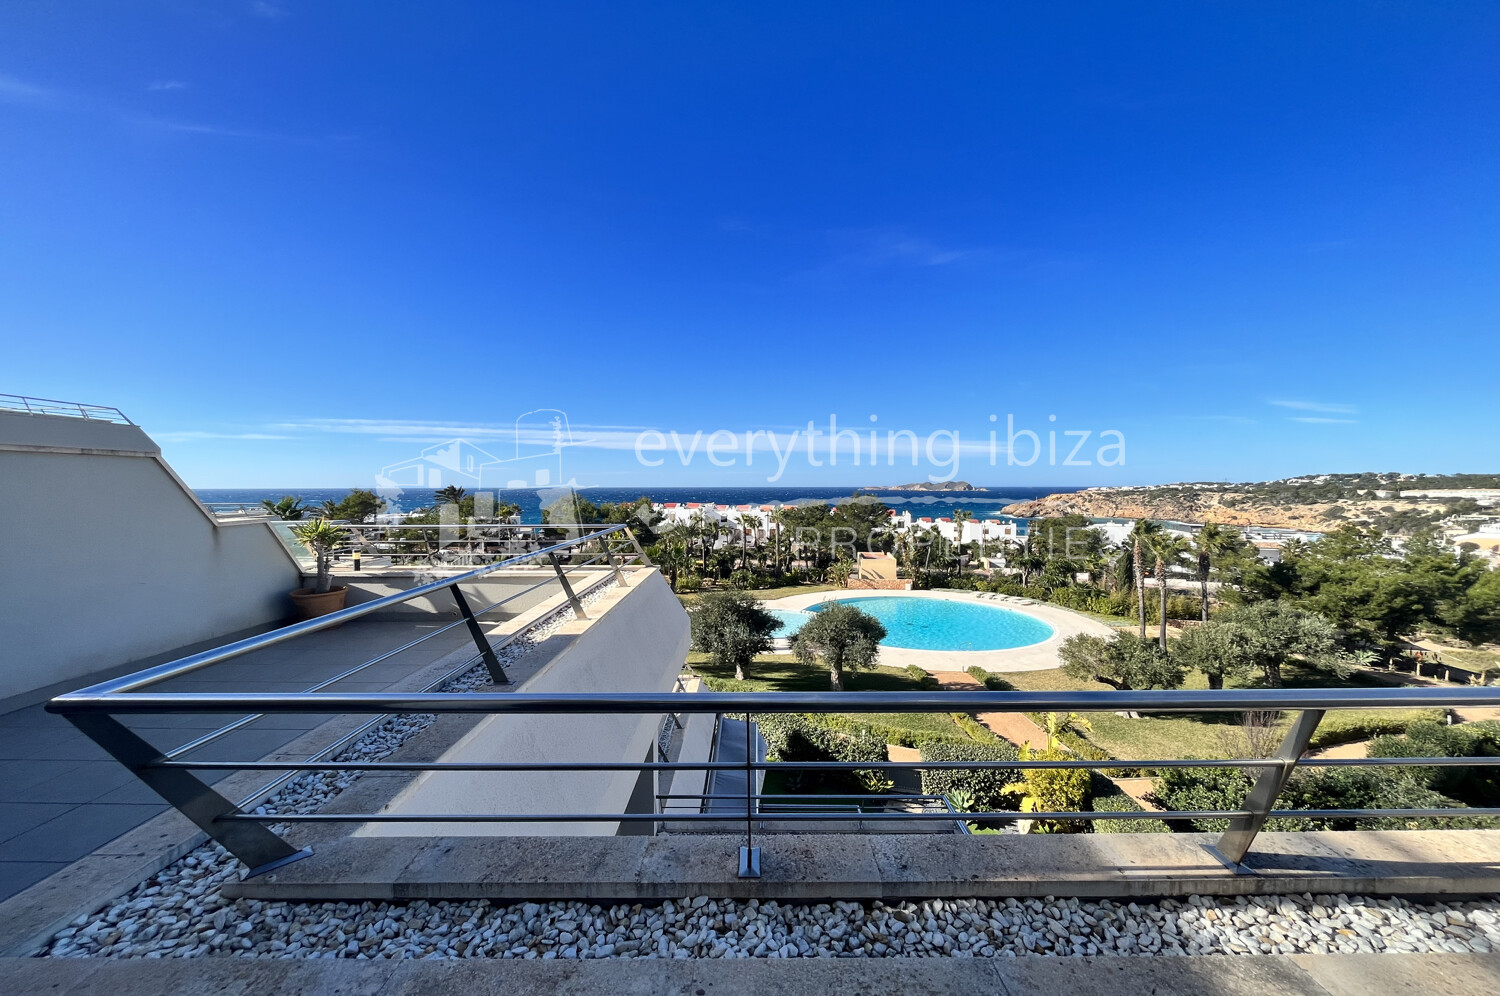 Super Penthouse with Roof Terrace & Stunning Views, ref. 1529, for sale in Ibiza by everything ibiza Properties